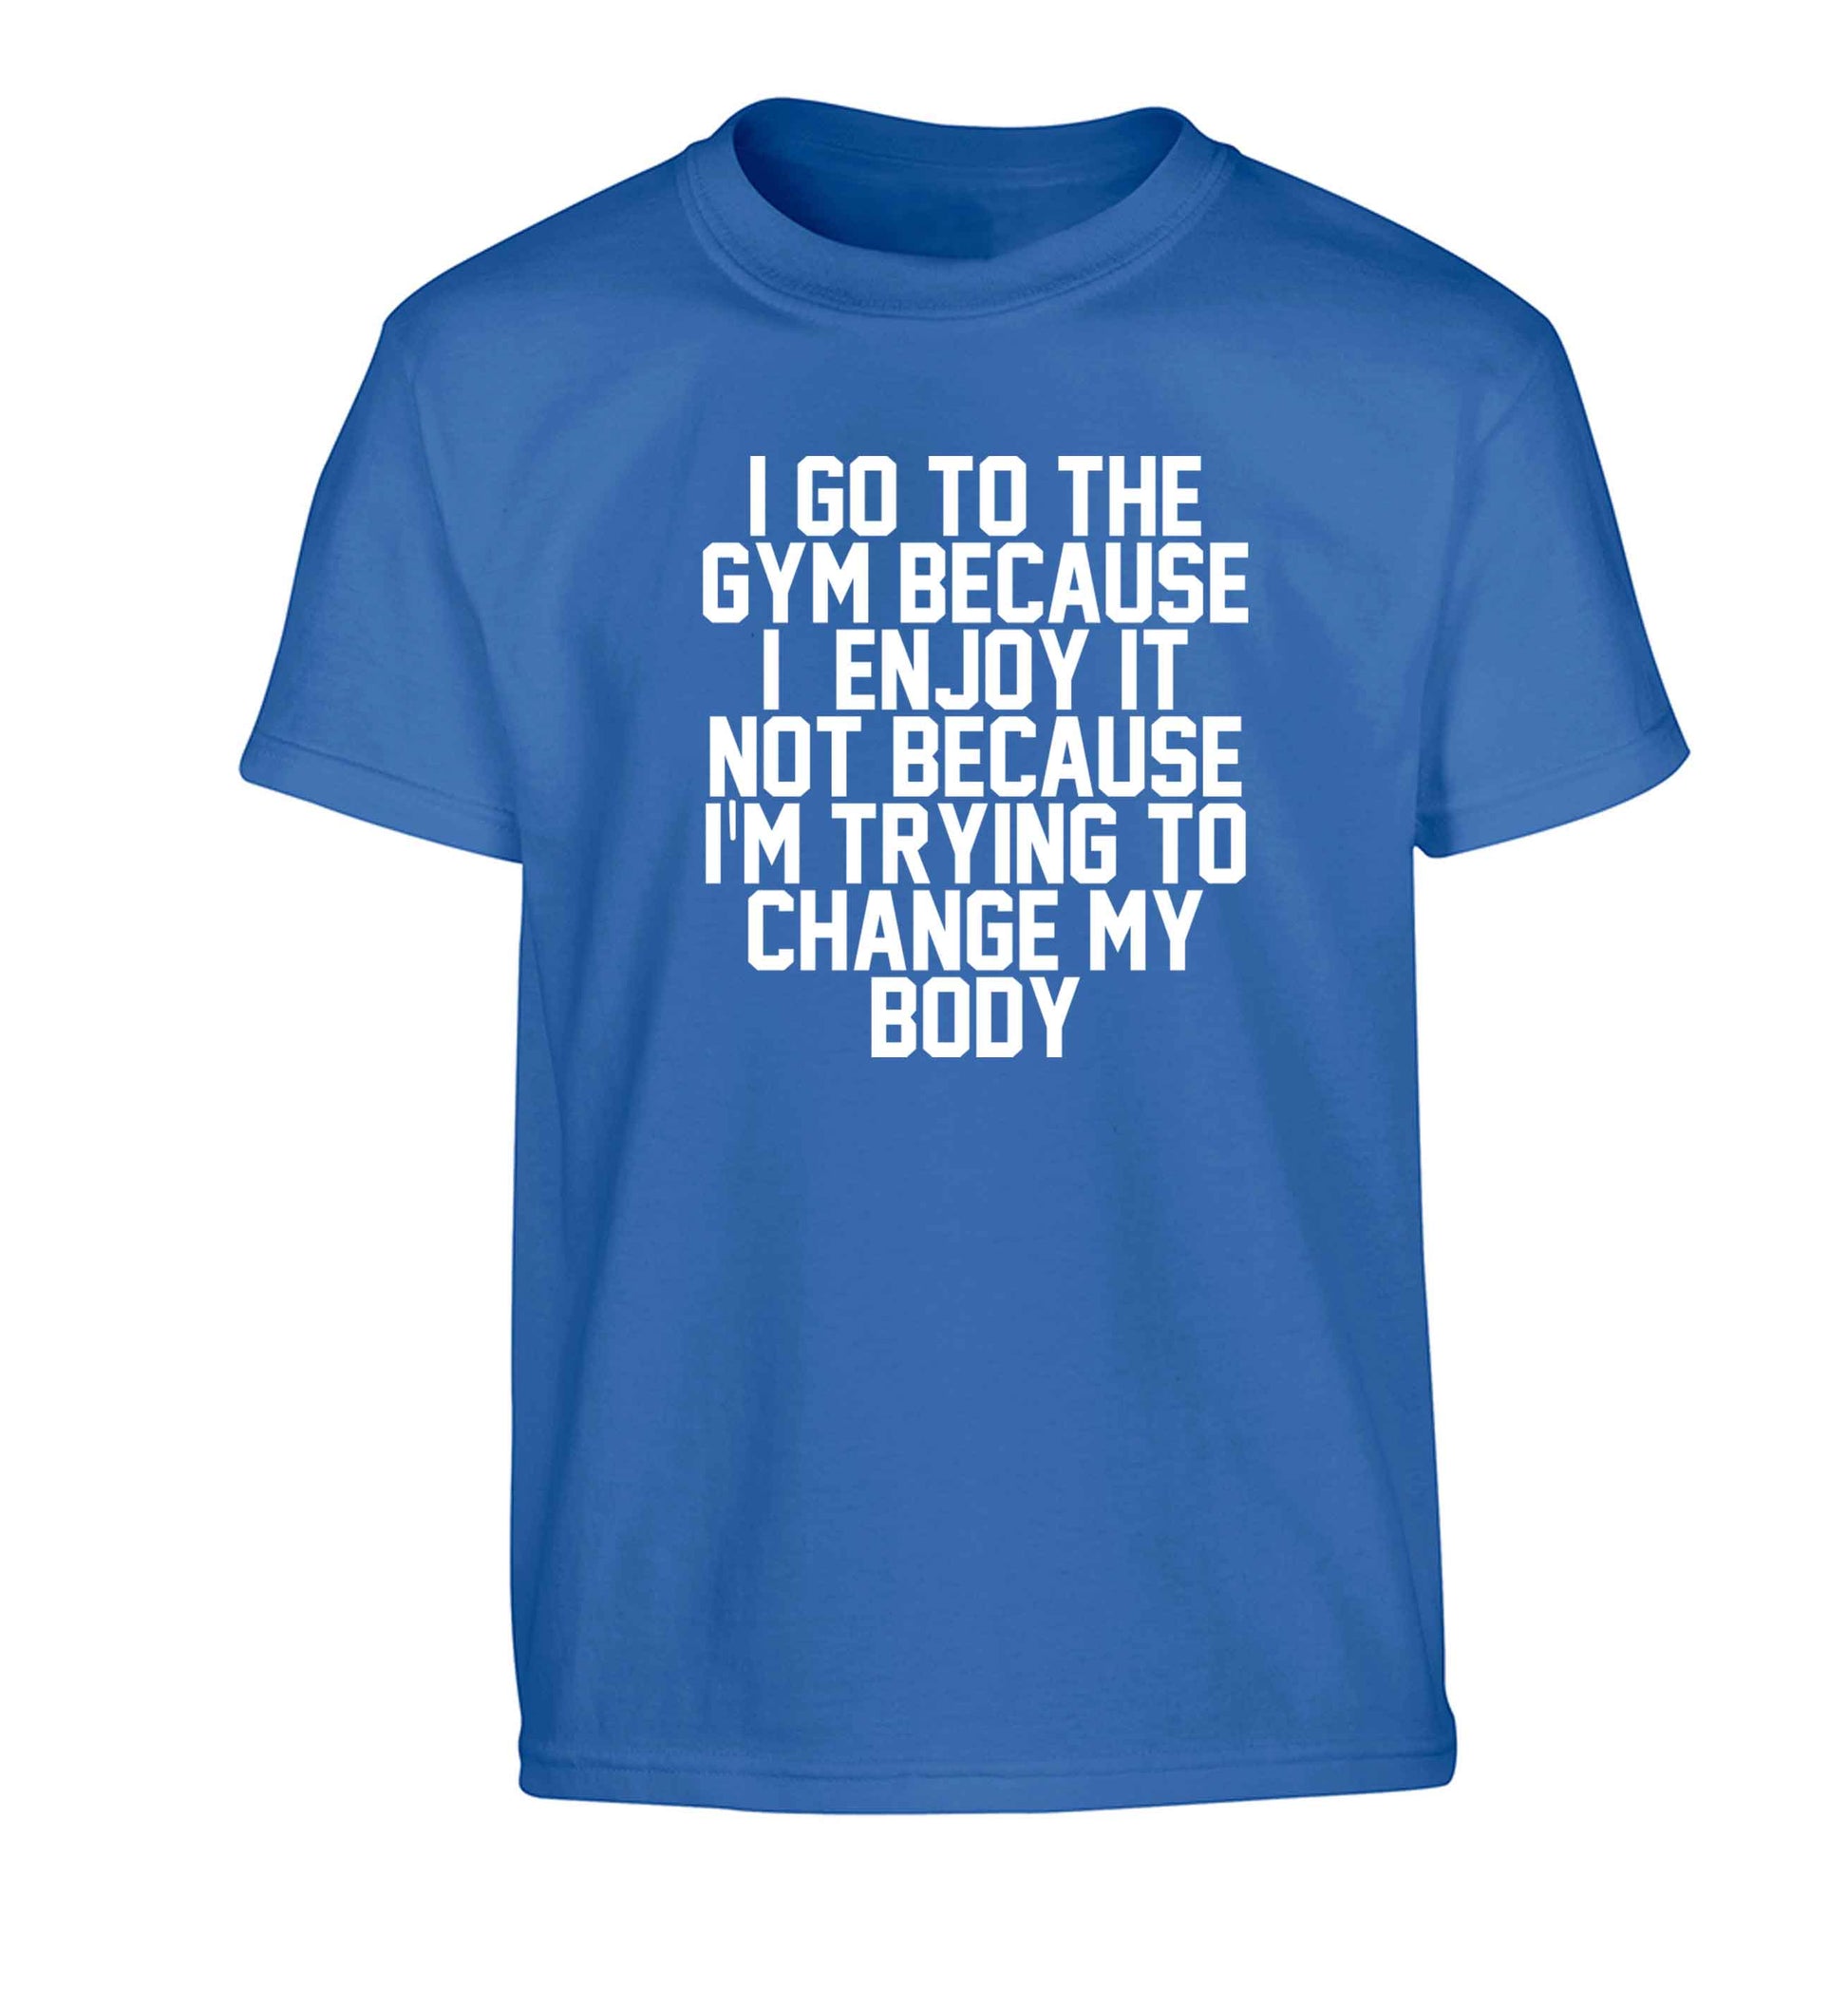 I go to the gym because I enjoy it not because I'm trying to change my body Children's blue Tshirt 12-13 Years